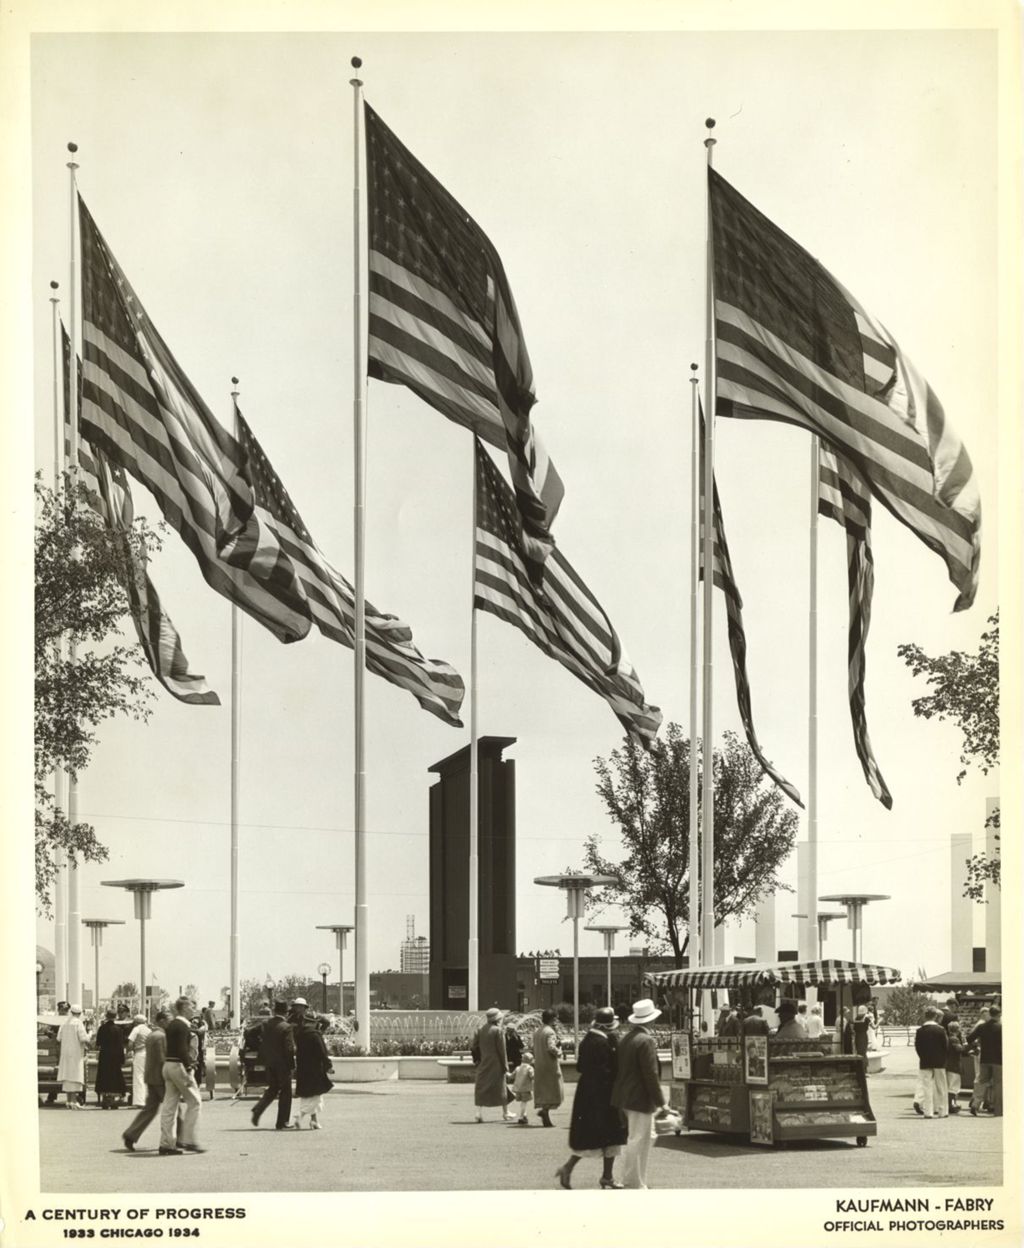 The Avenue of Flags